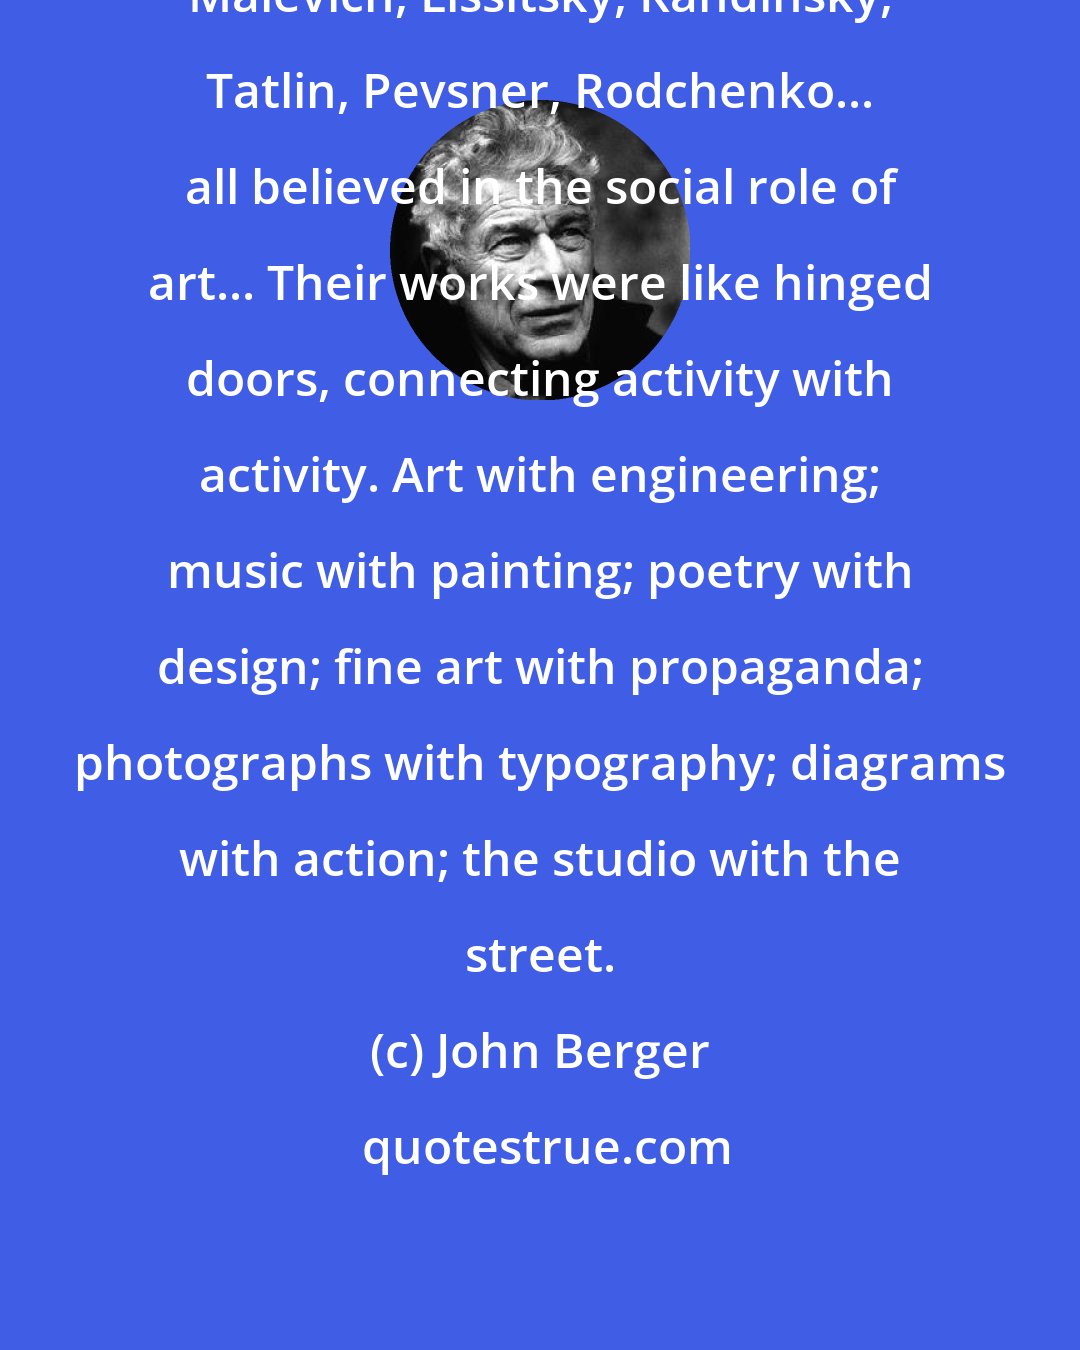 John Berger: Malevich, Lissitsky, Kandinsky, Tatlin, Pevsner, Rodchenko... all believed in the social role of art... Their works were like hinged doors, connecting activity with activity. Art with engineering; music with painting; poetry with design; fine art with propaganda; photographs with typography; diagrams with action; the studio with the street.